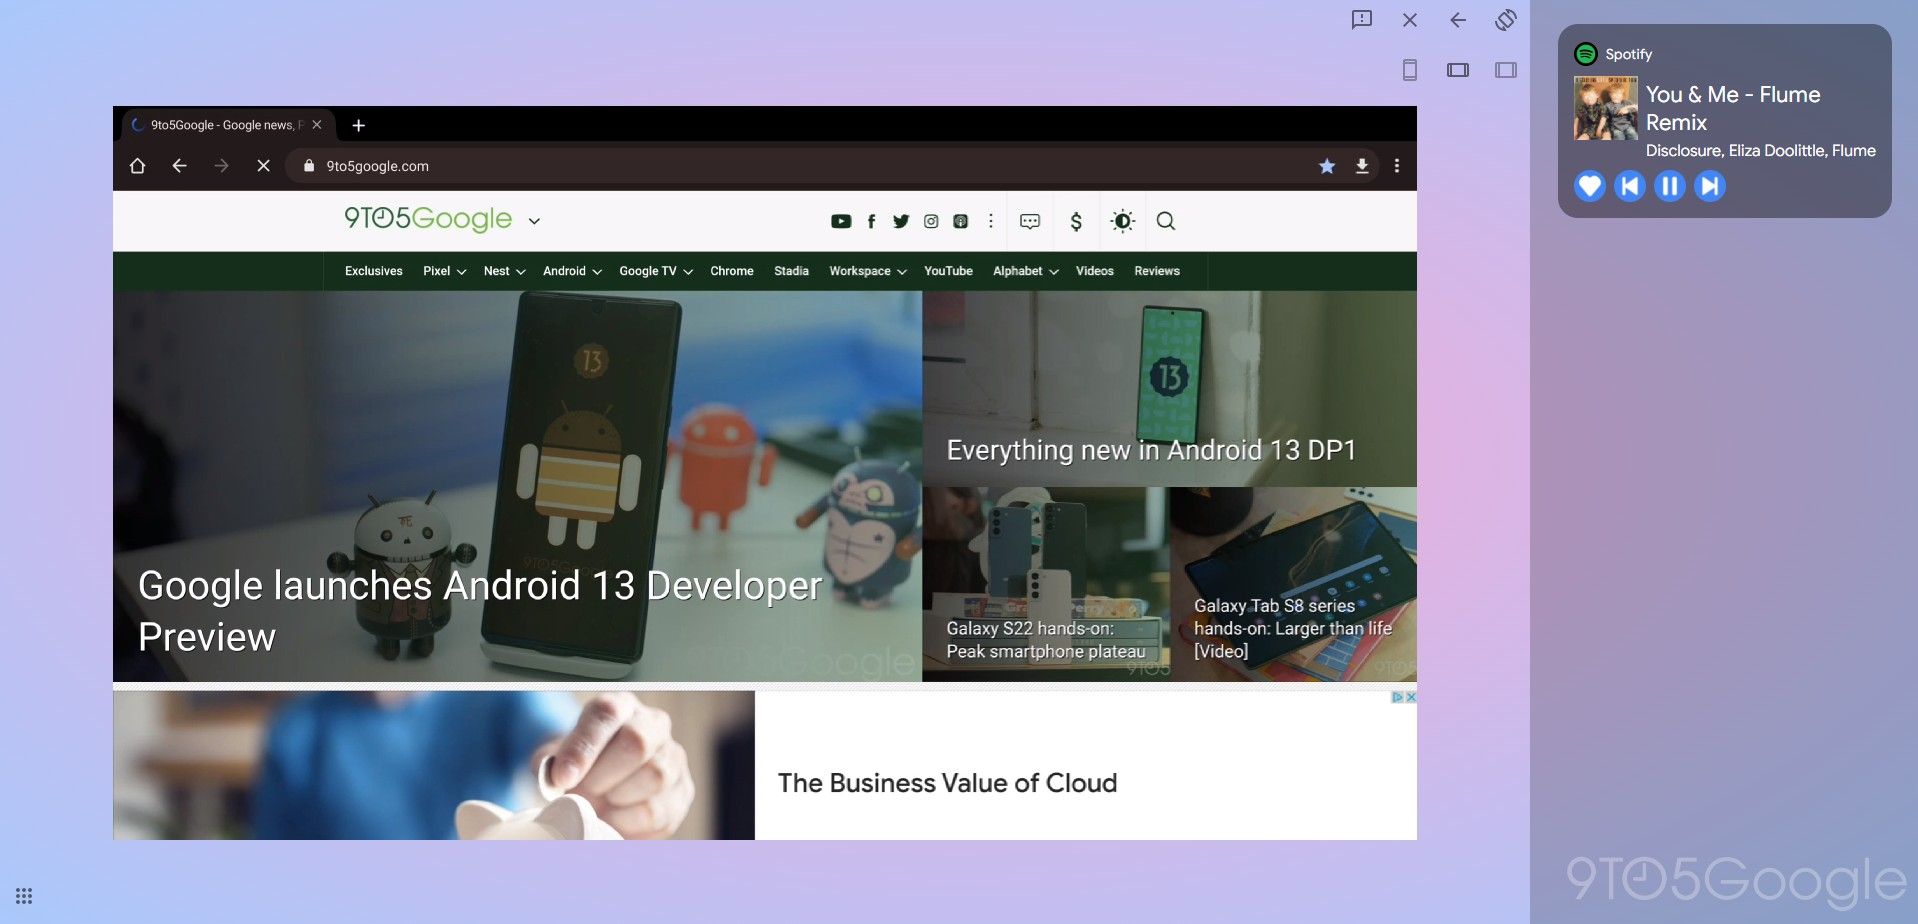 pixel-cross-device-streaming-chrome-9to5google